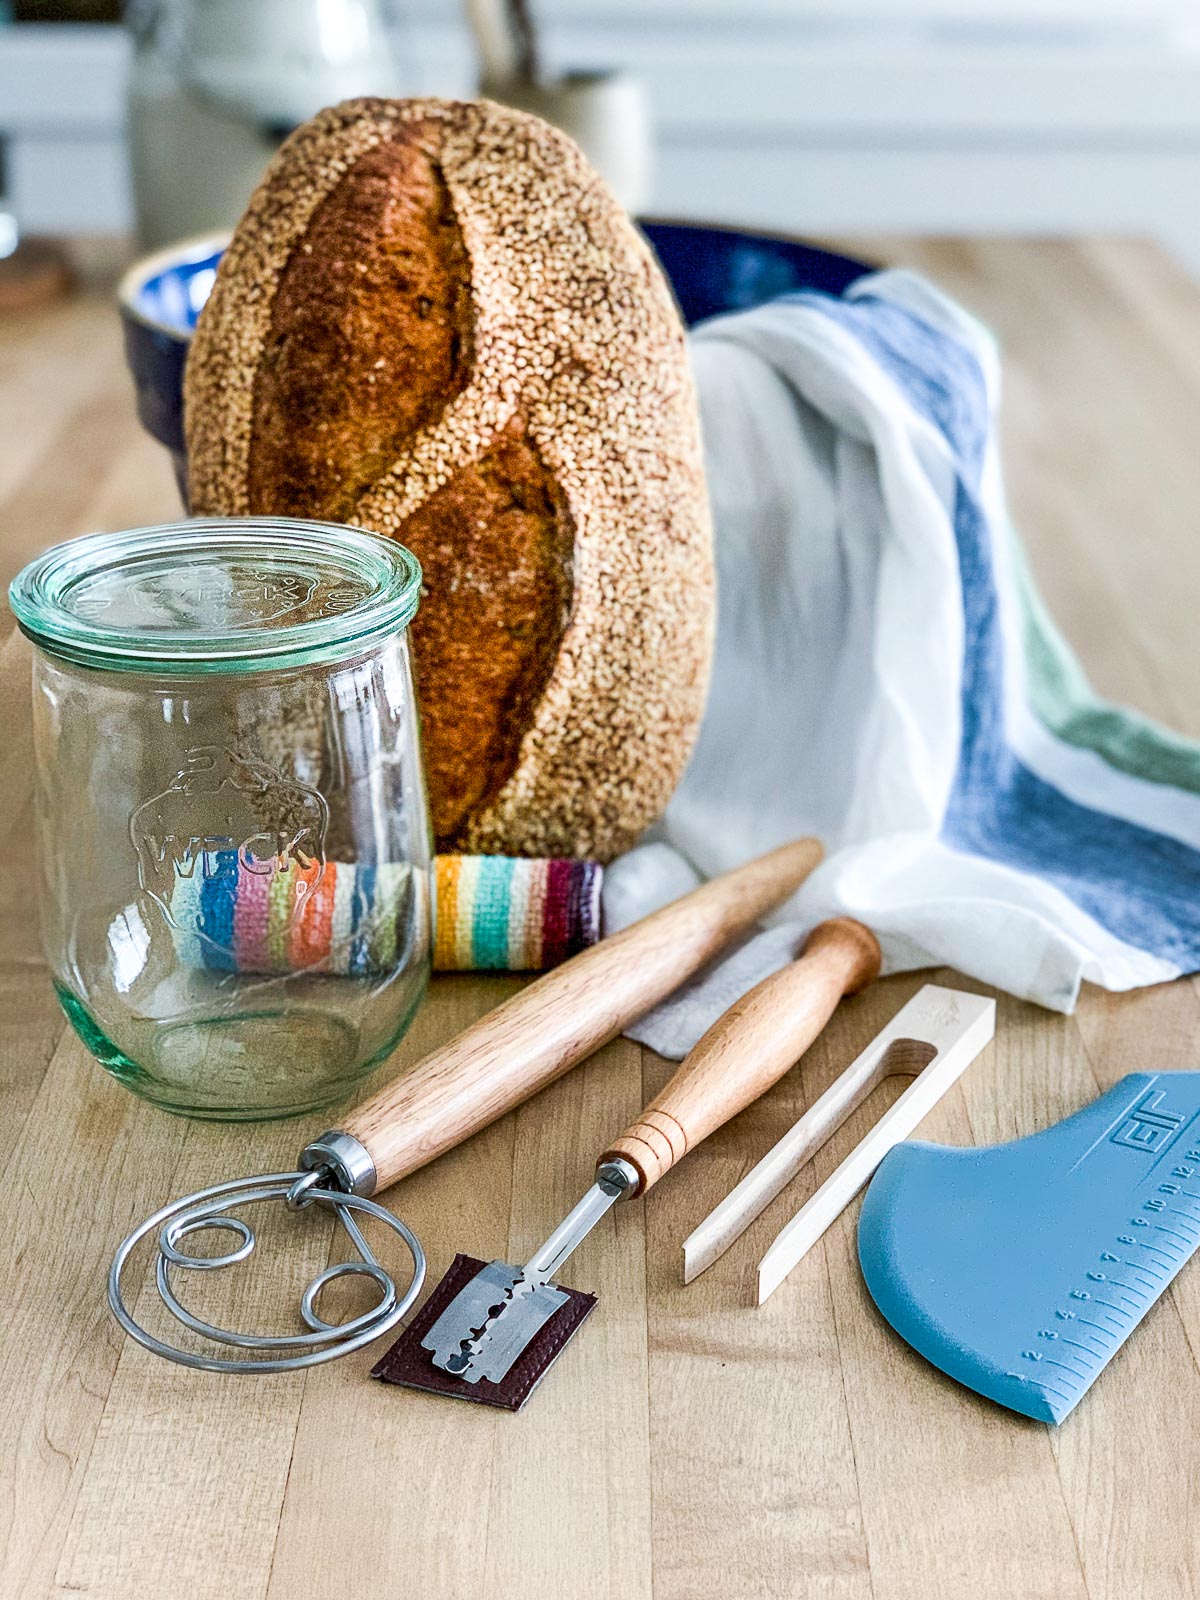 Sale on bread making supplies